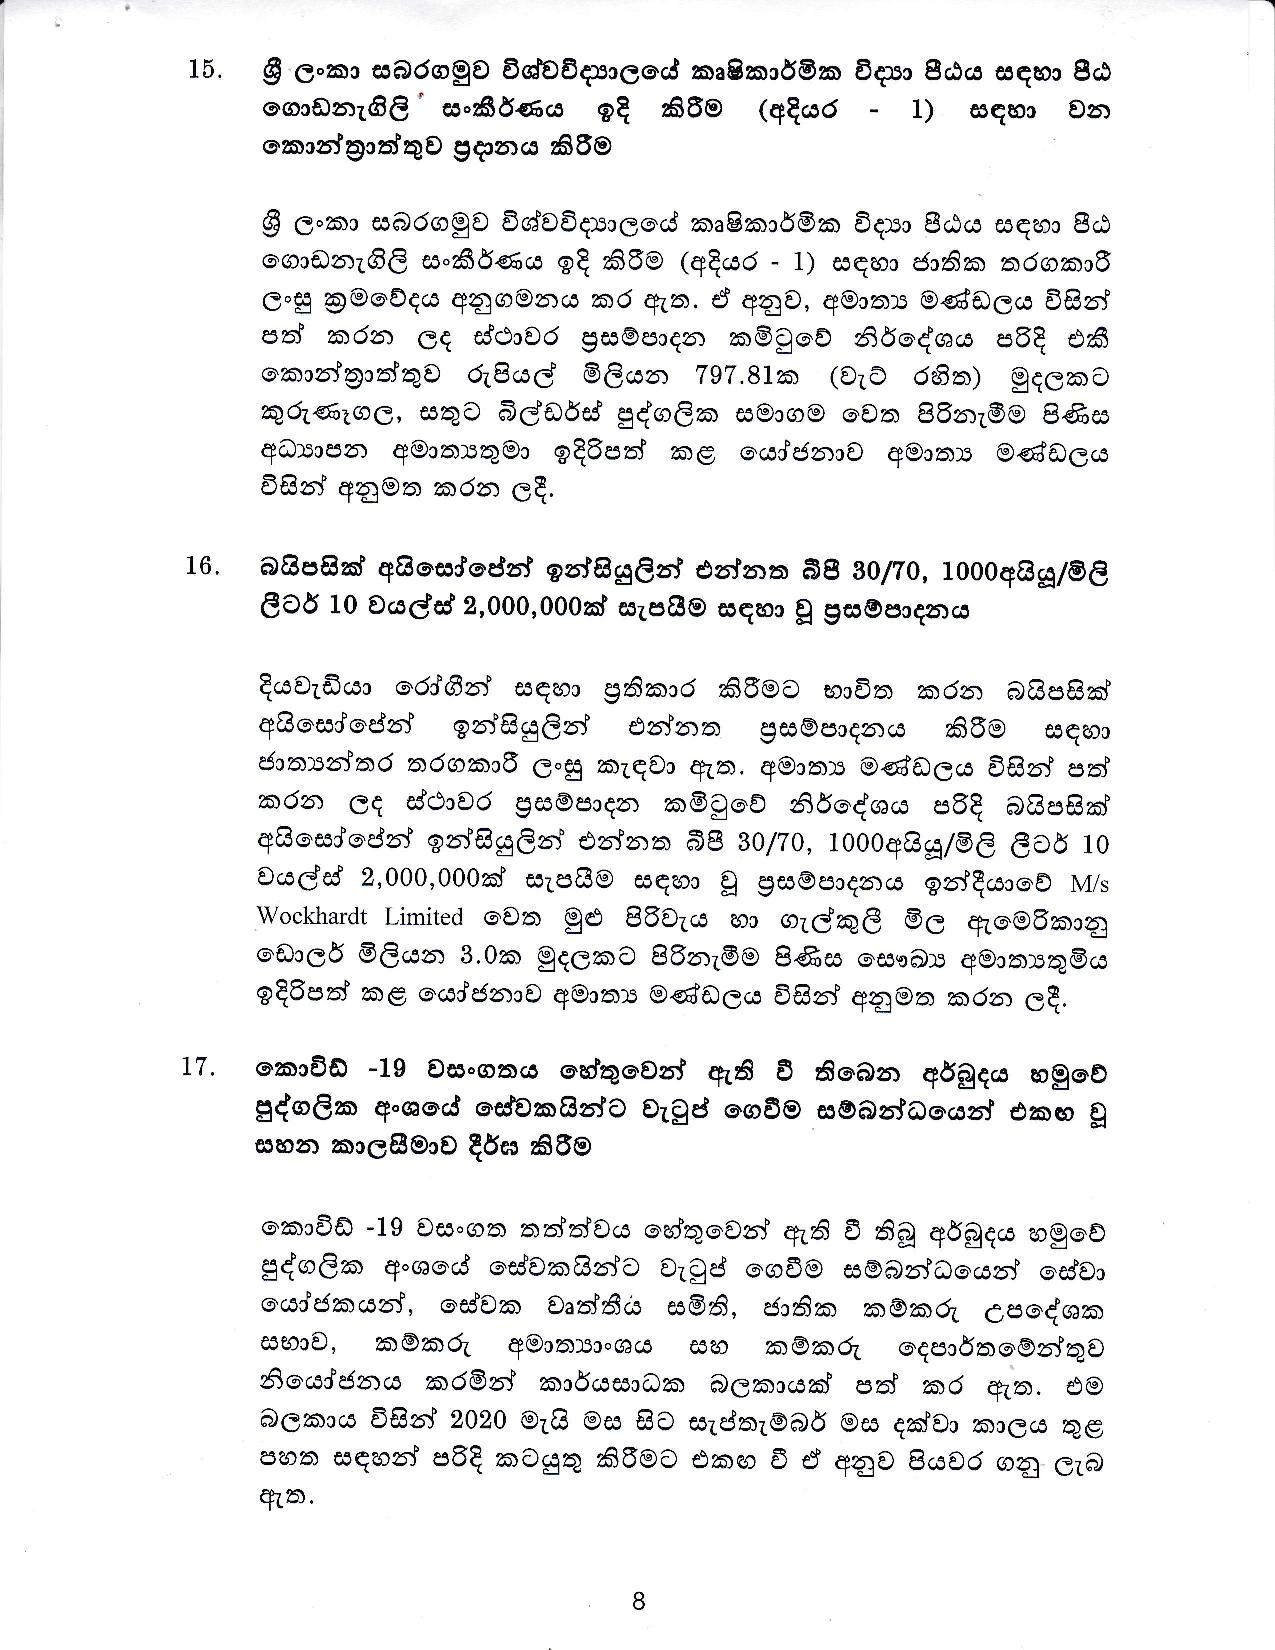 Cabinet Decision on 26.10.2020 page 008